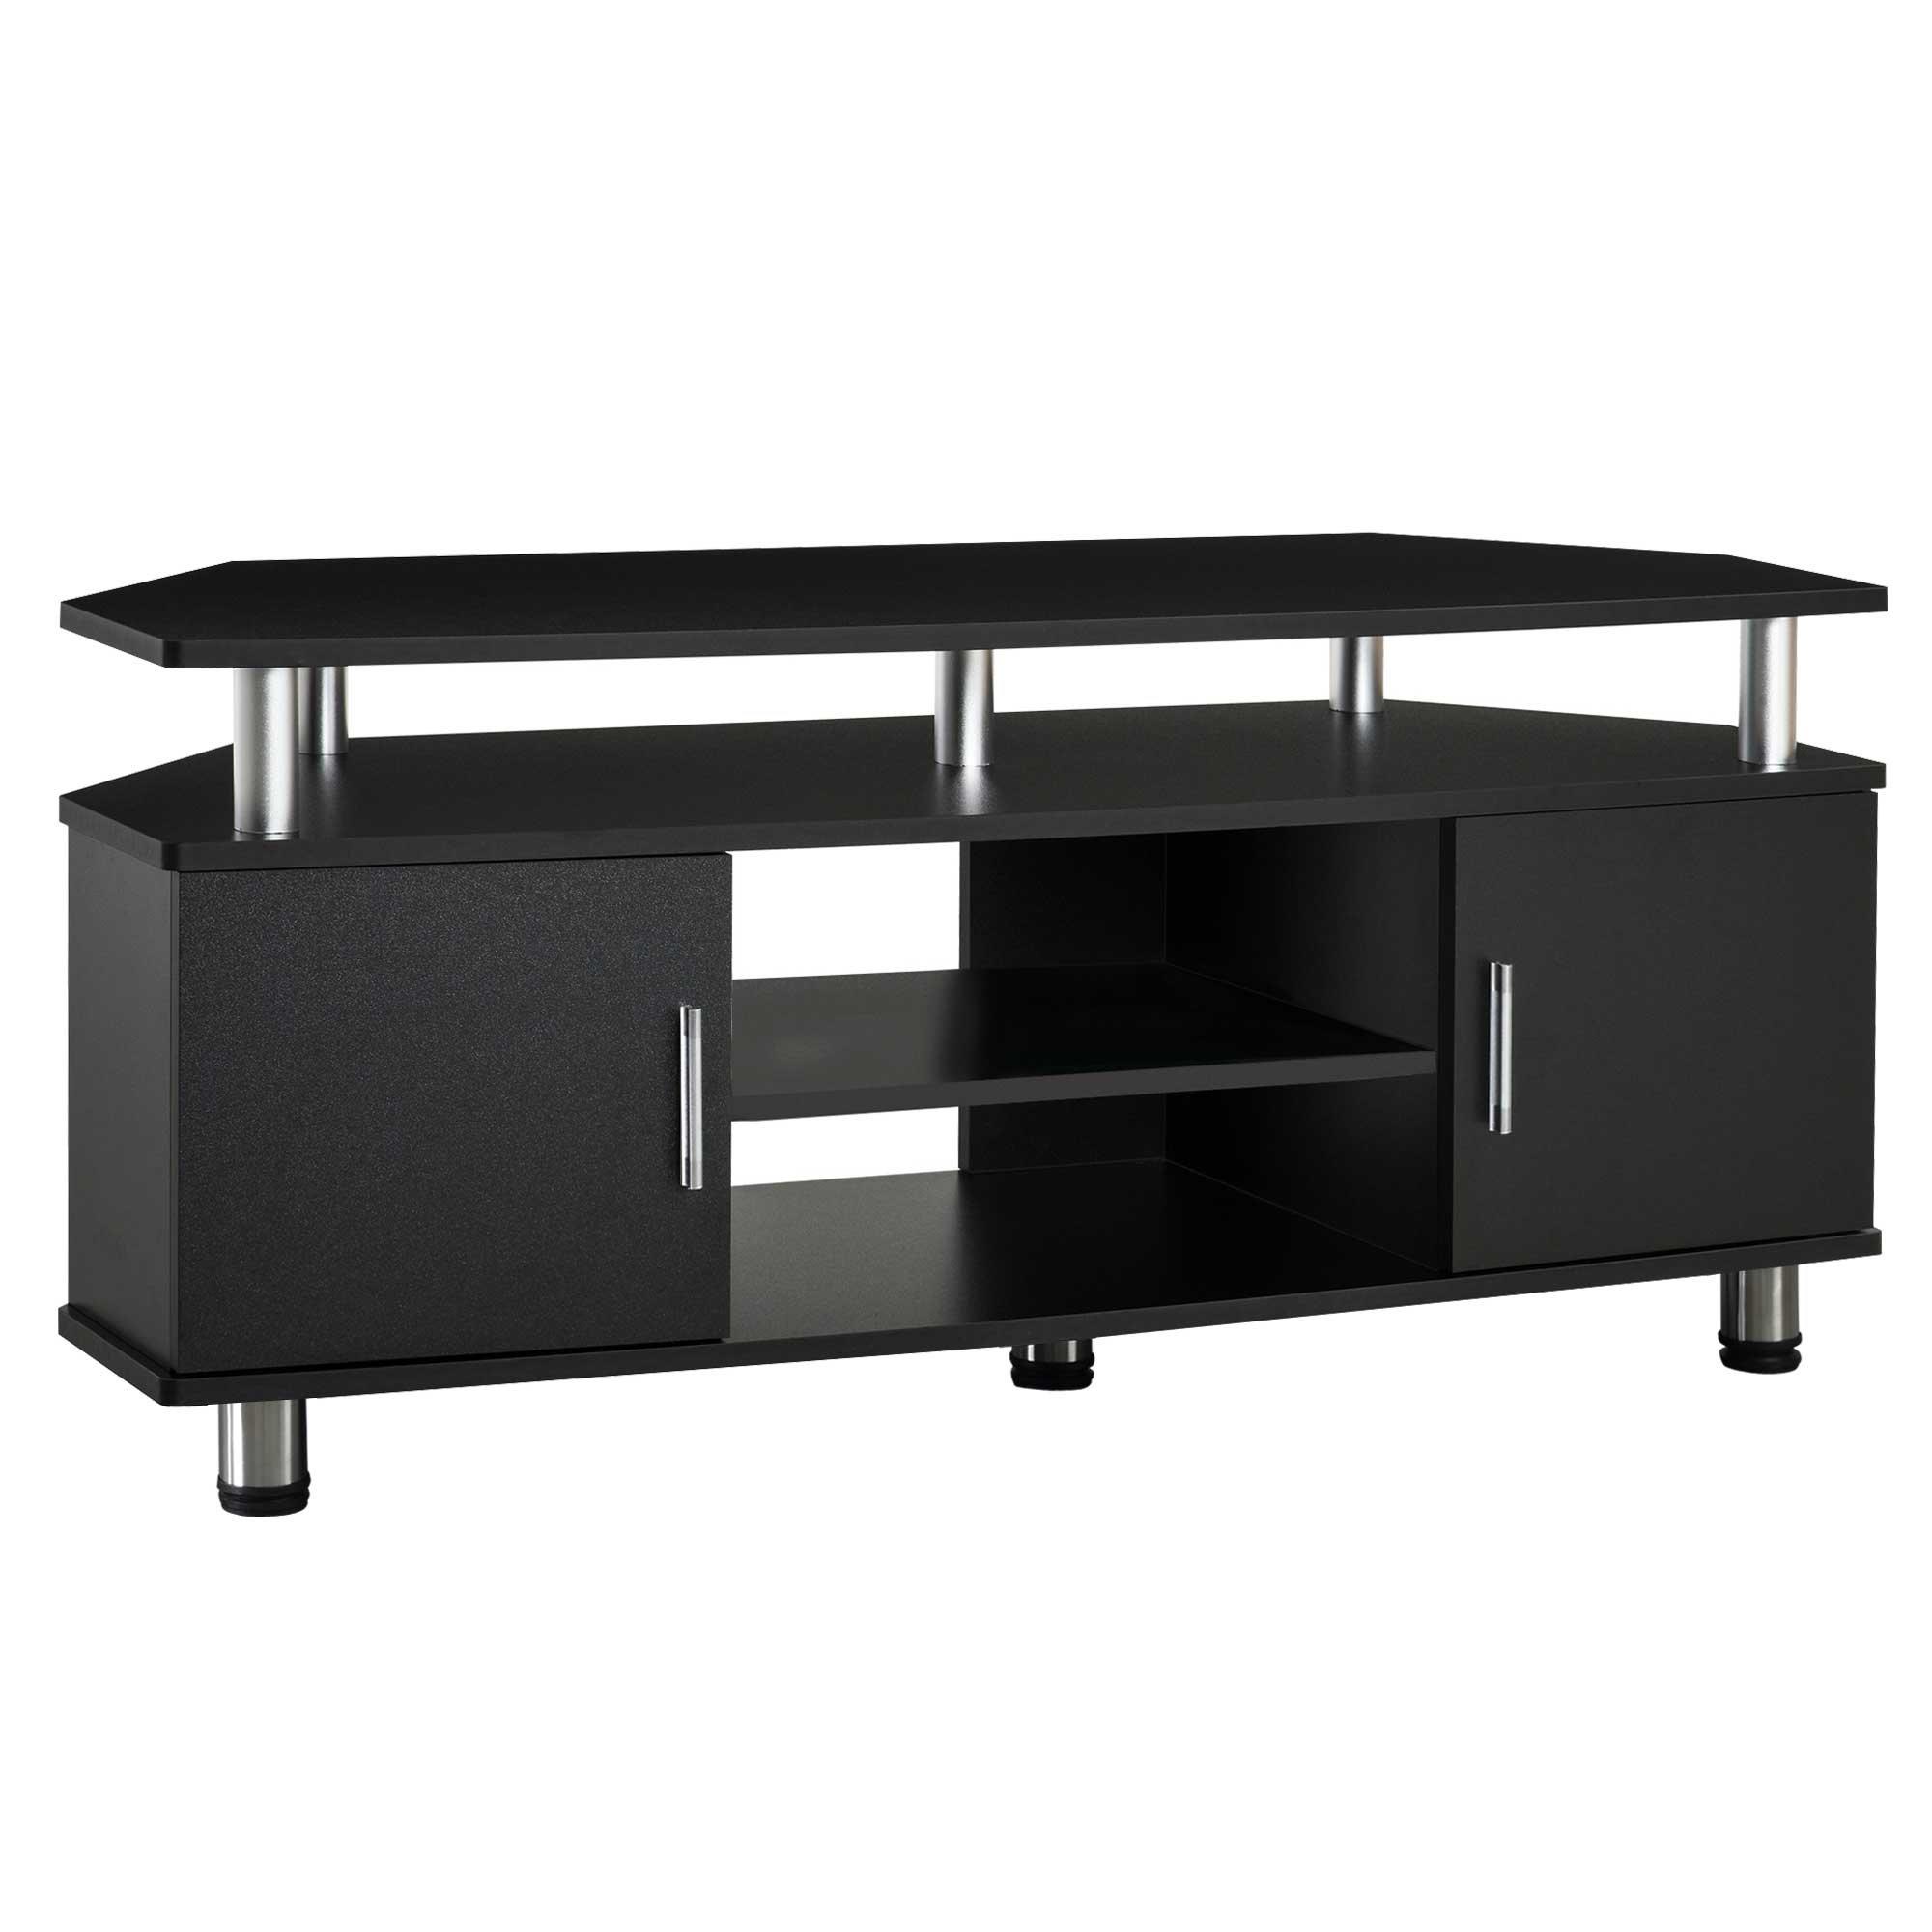 TV Stand Cabinet with Storage Shelves Cupboard Living Room